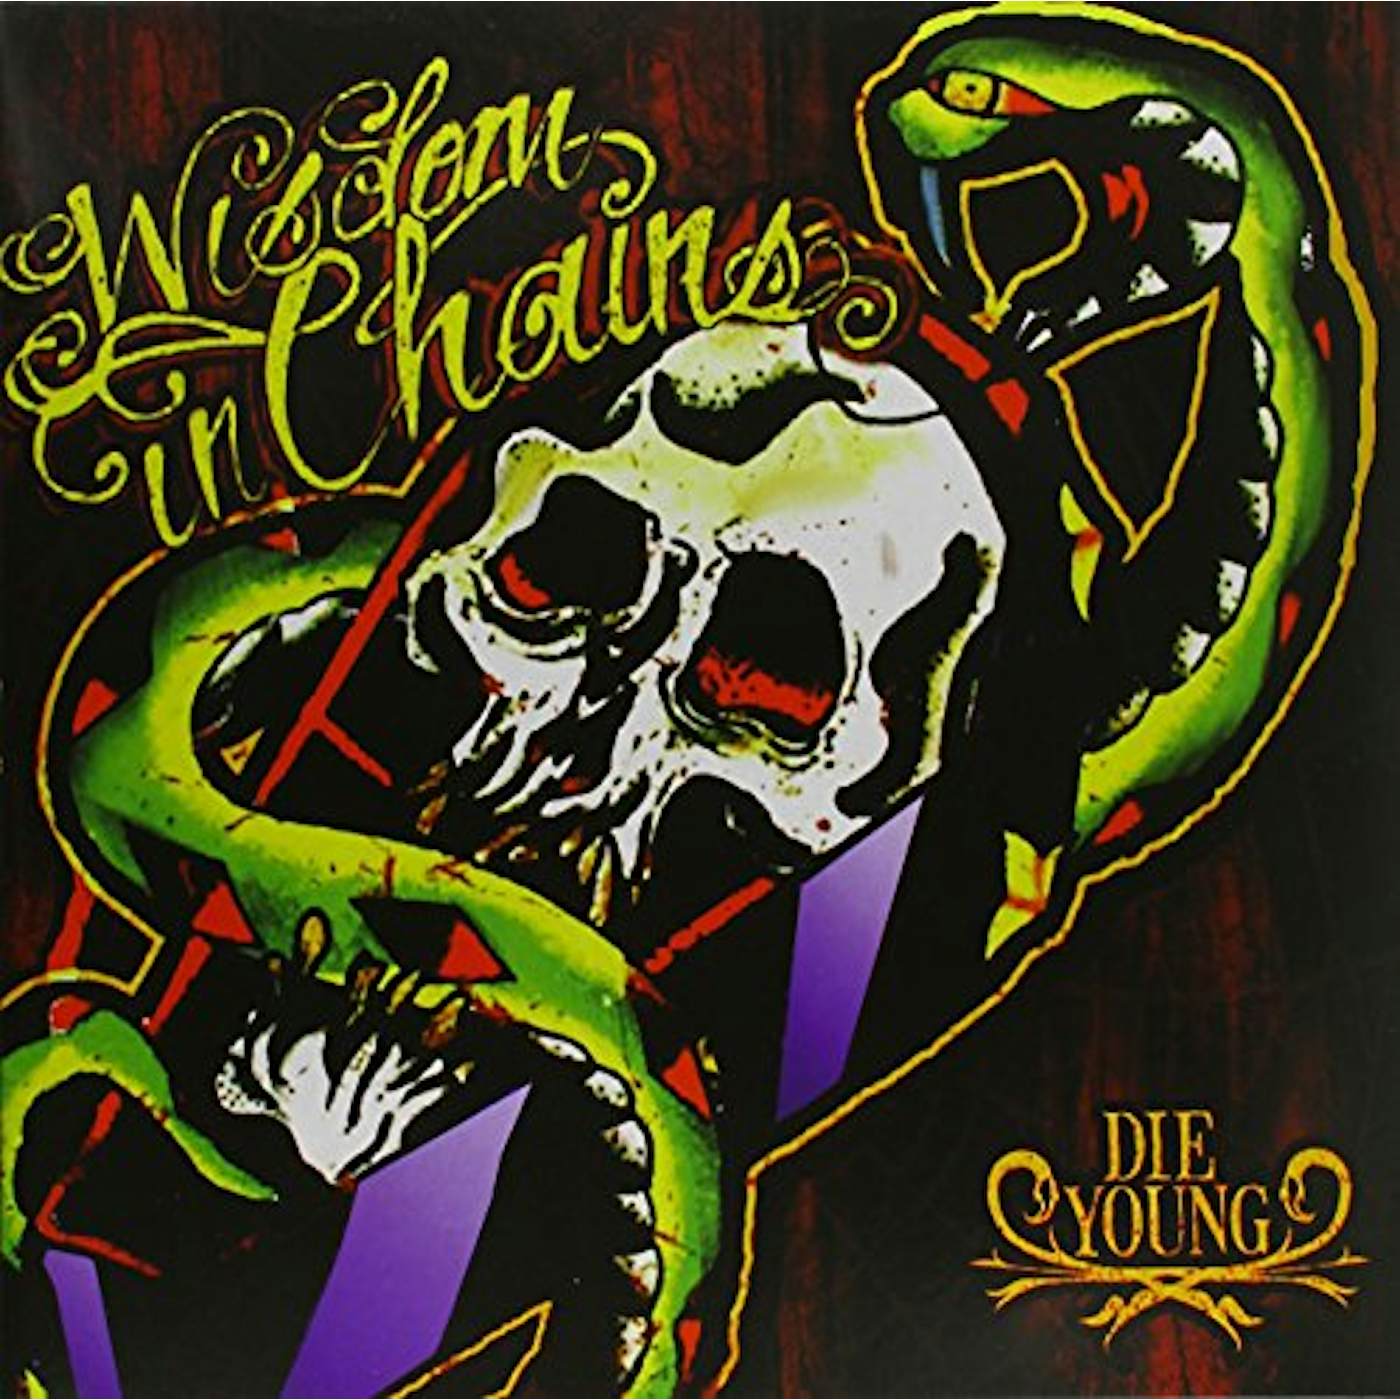 Wisdom In Chains DIE YOUNG - 10TH ANIVERSARY EDITION Vinyl Record